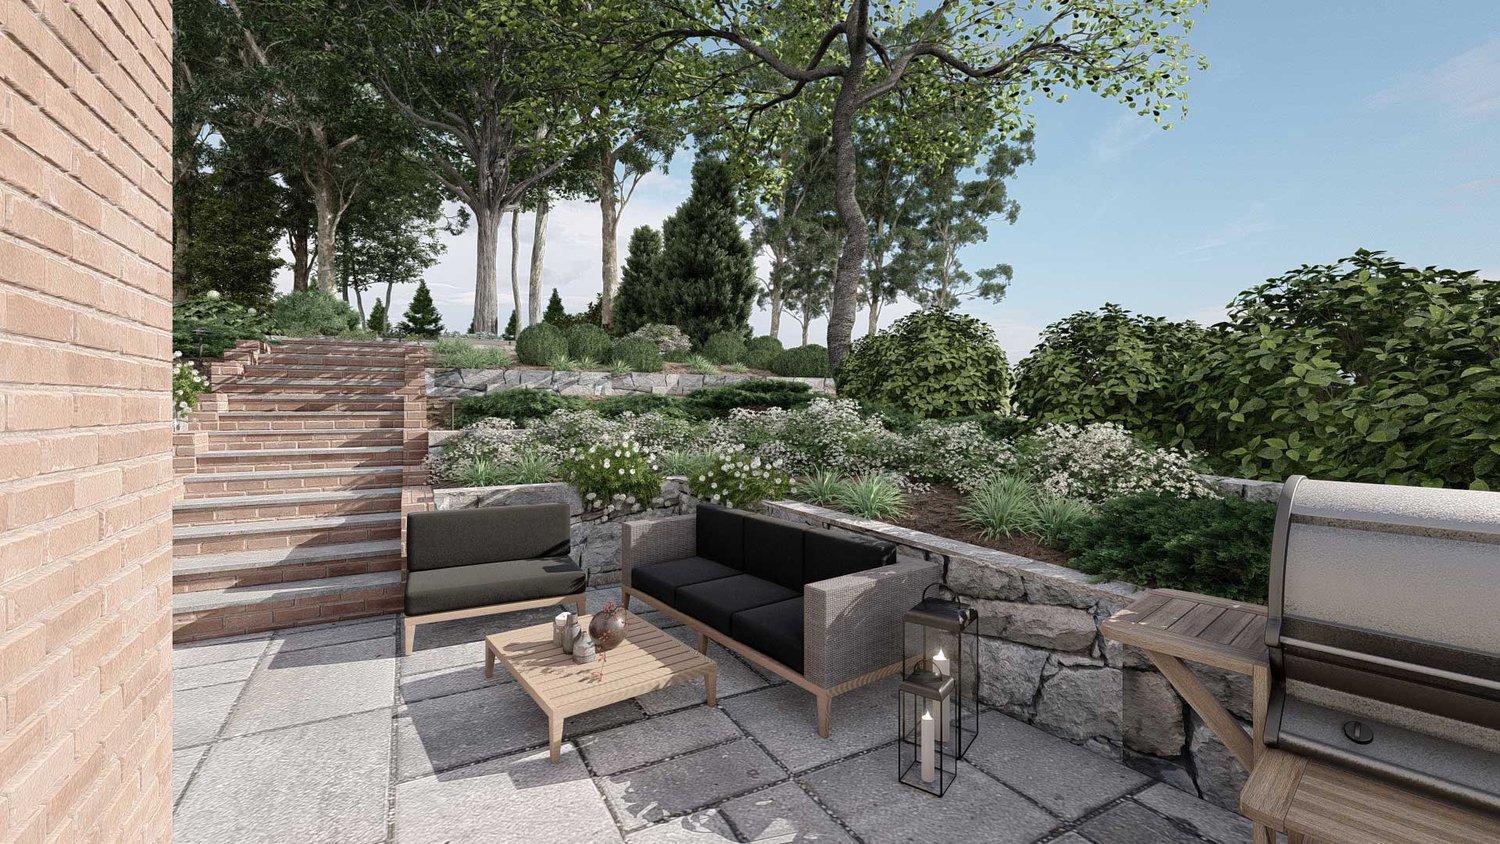 Long Island side yard with trees and plants in the background with concrete paver patio with seating area and outdoor kitchen, and concrete paver stairway